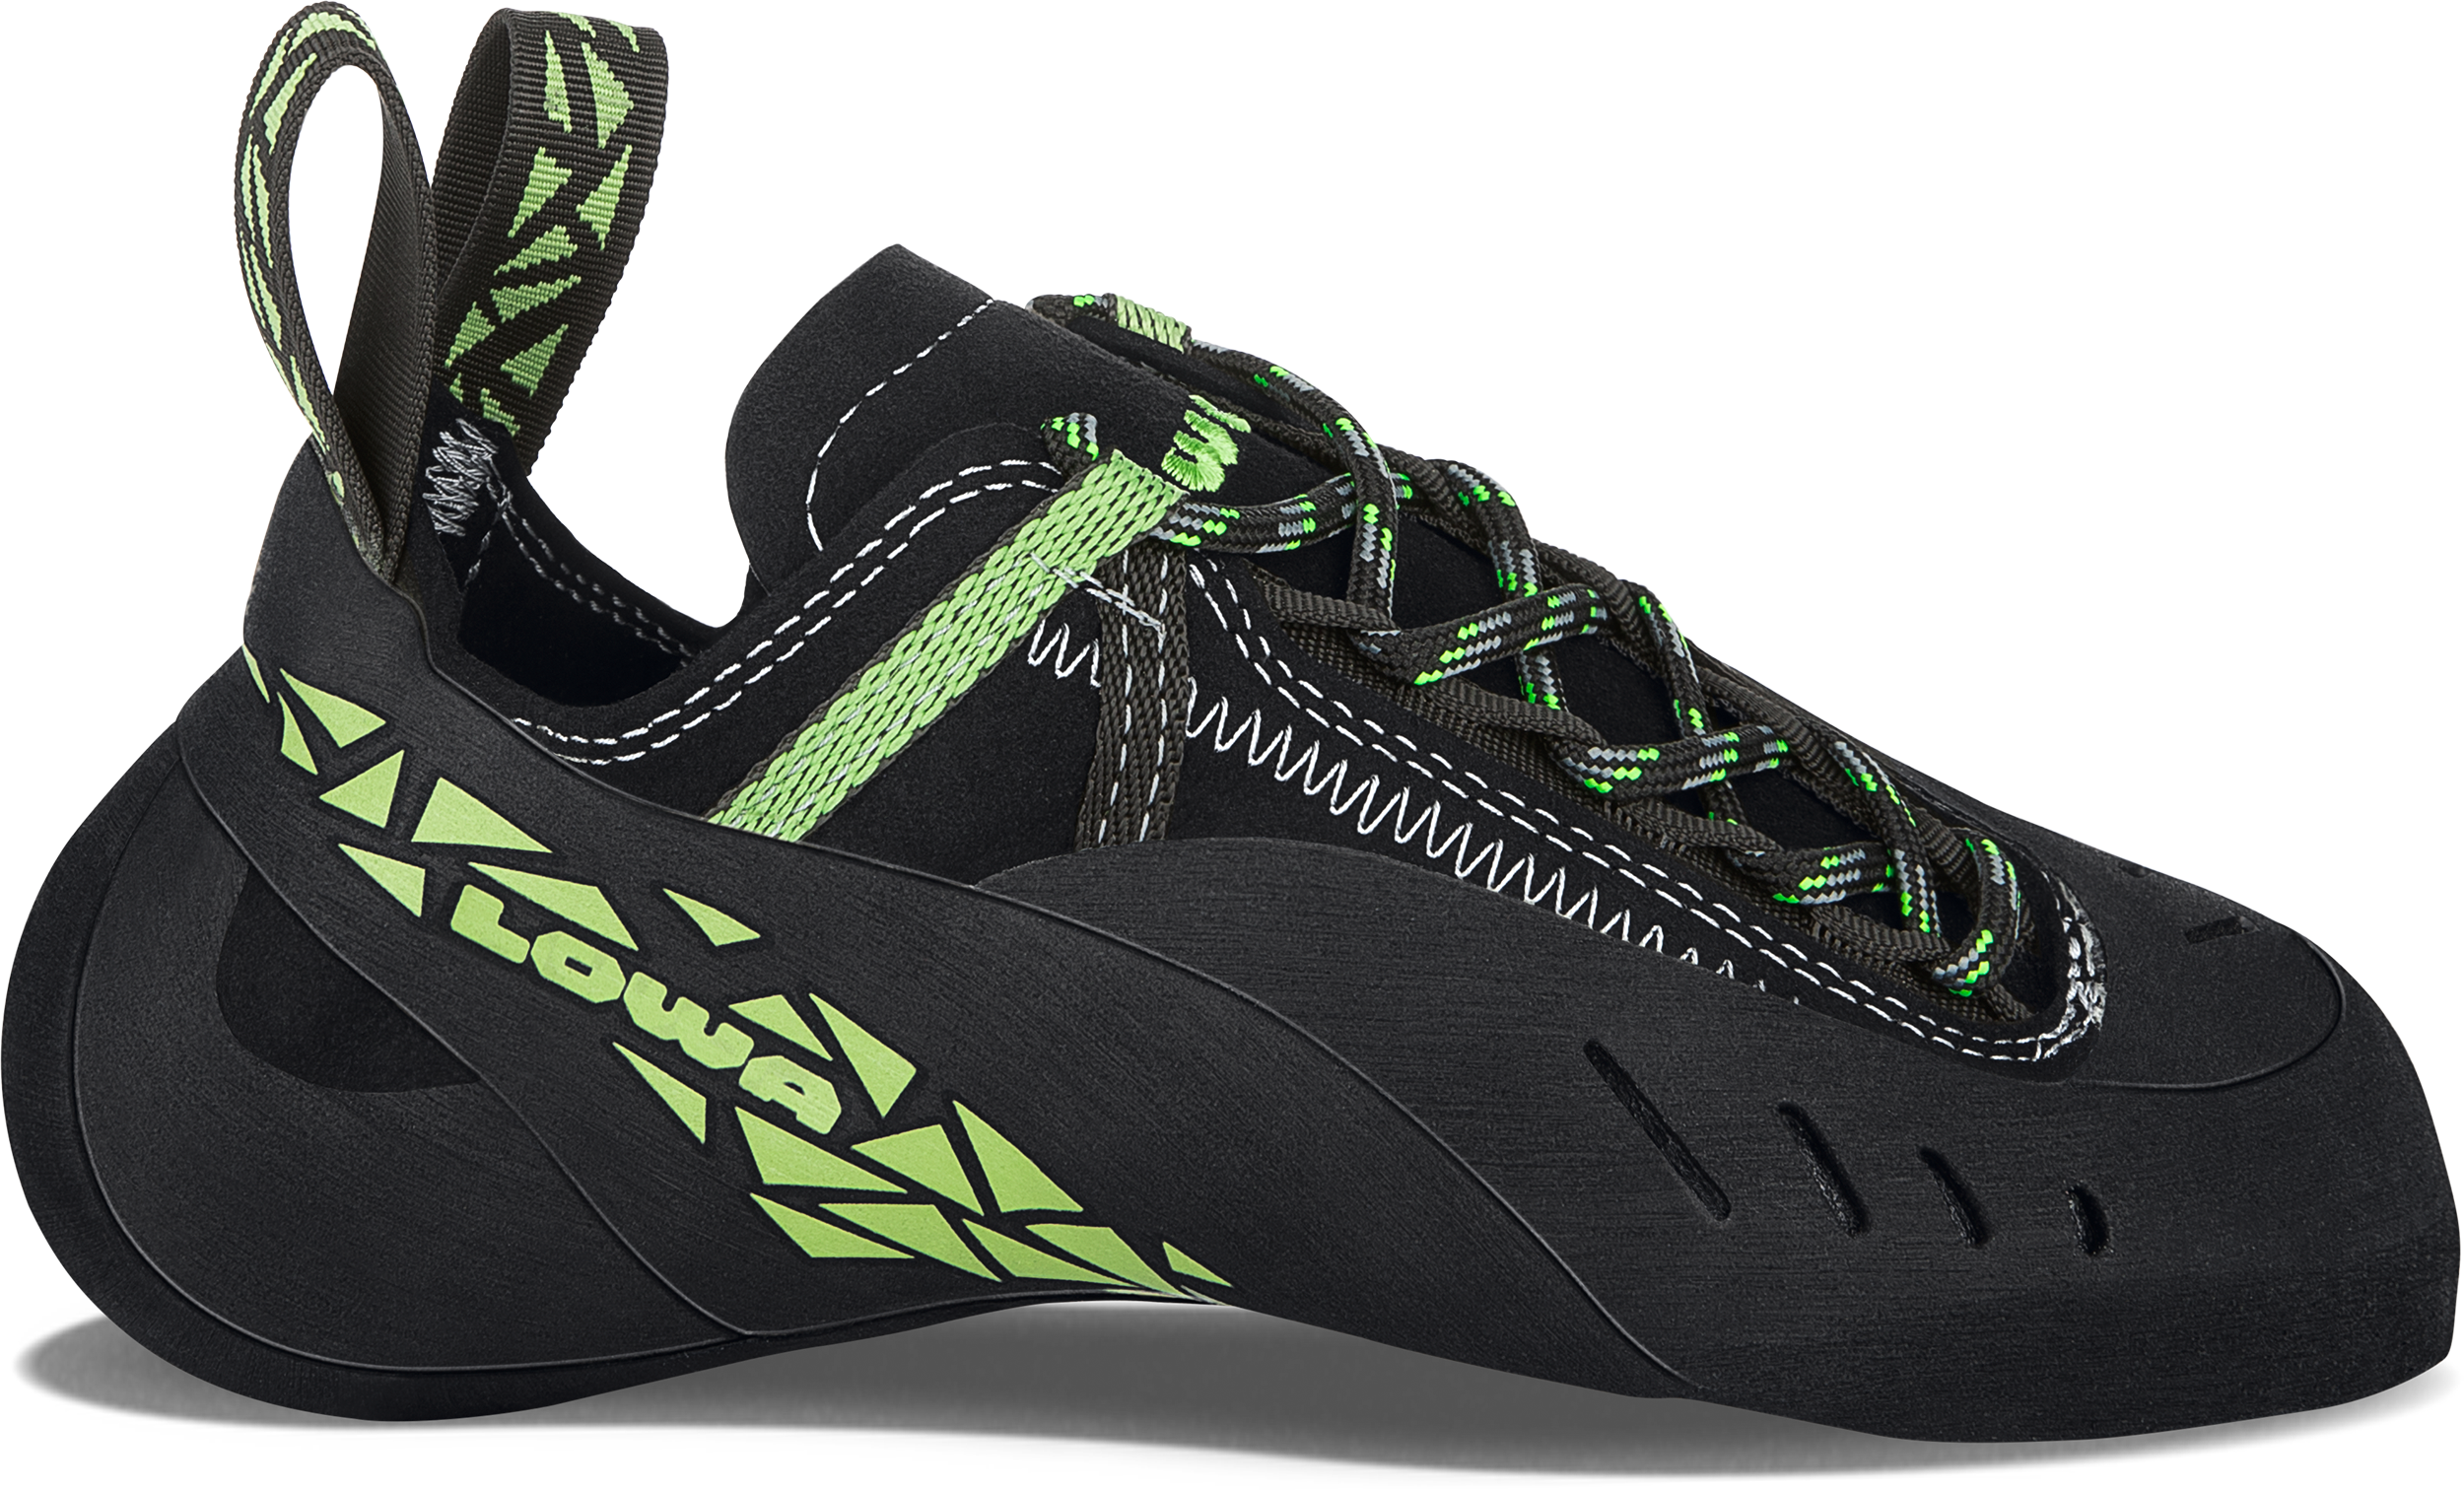 Picasso dizzy abscess ROCKET LACING: CLIMBING shoes for women. | LOWA LT